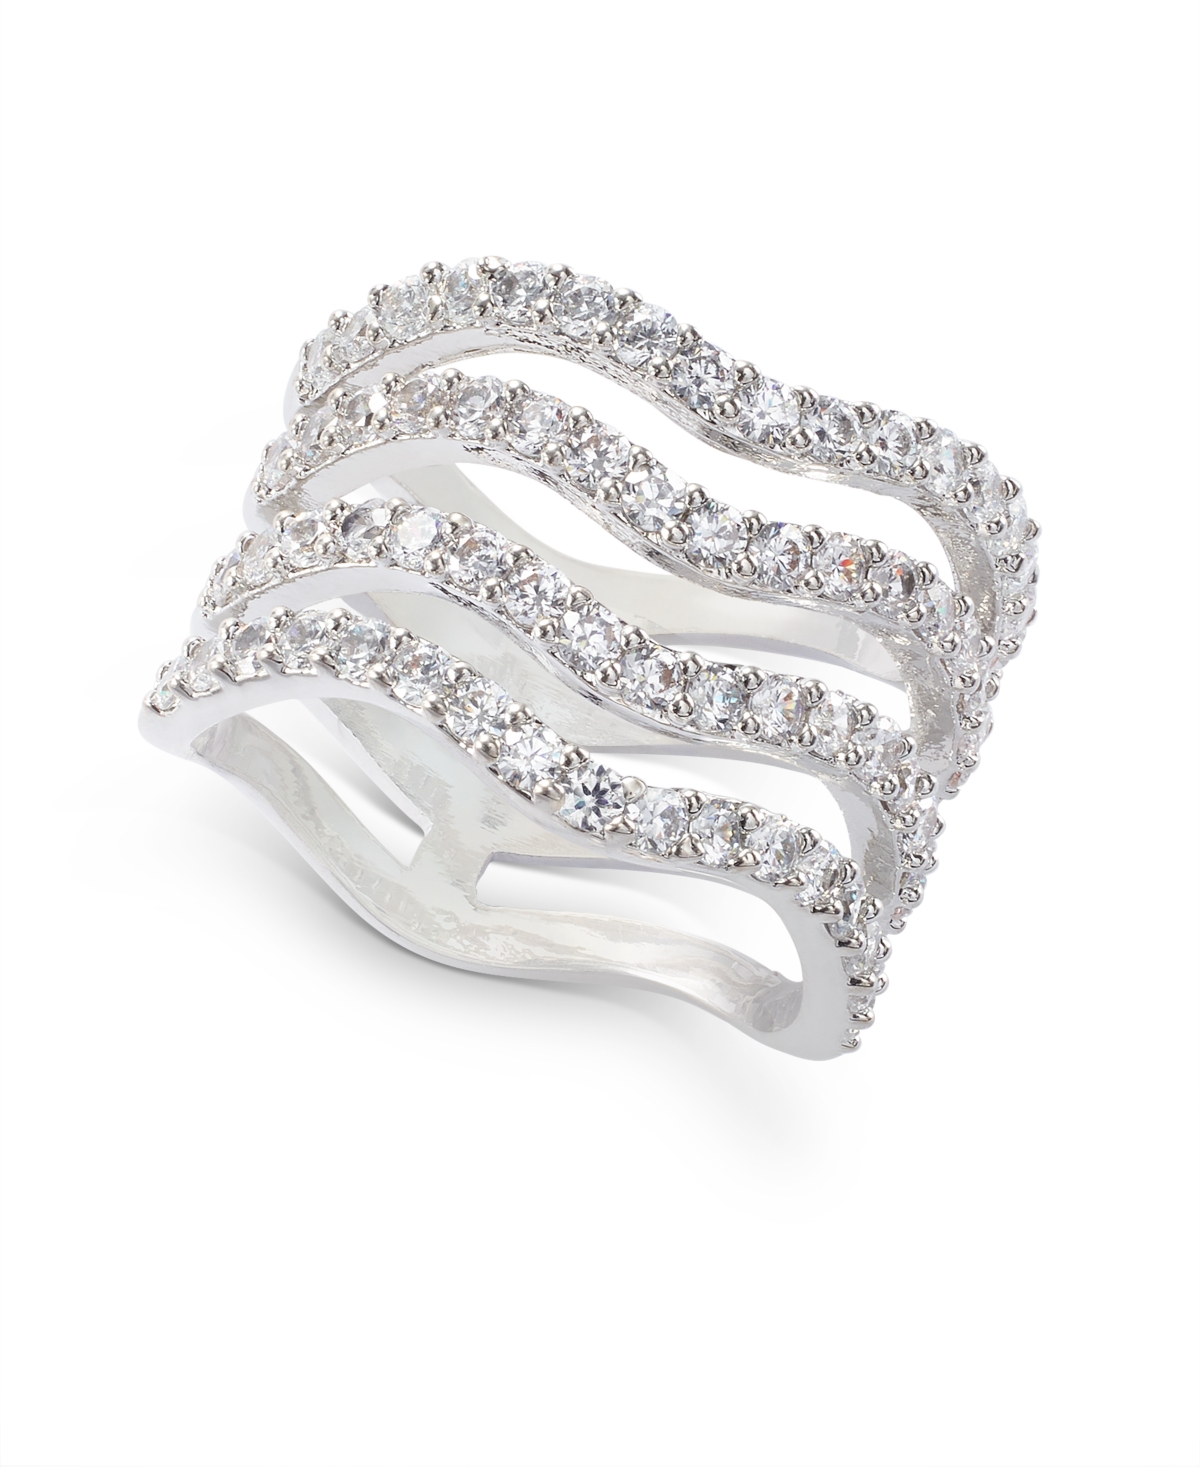 Silver-Tone Crystal Wavy Multi-Row Ring, Created for Macy's - Silver